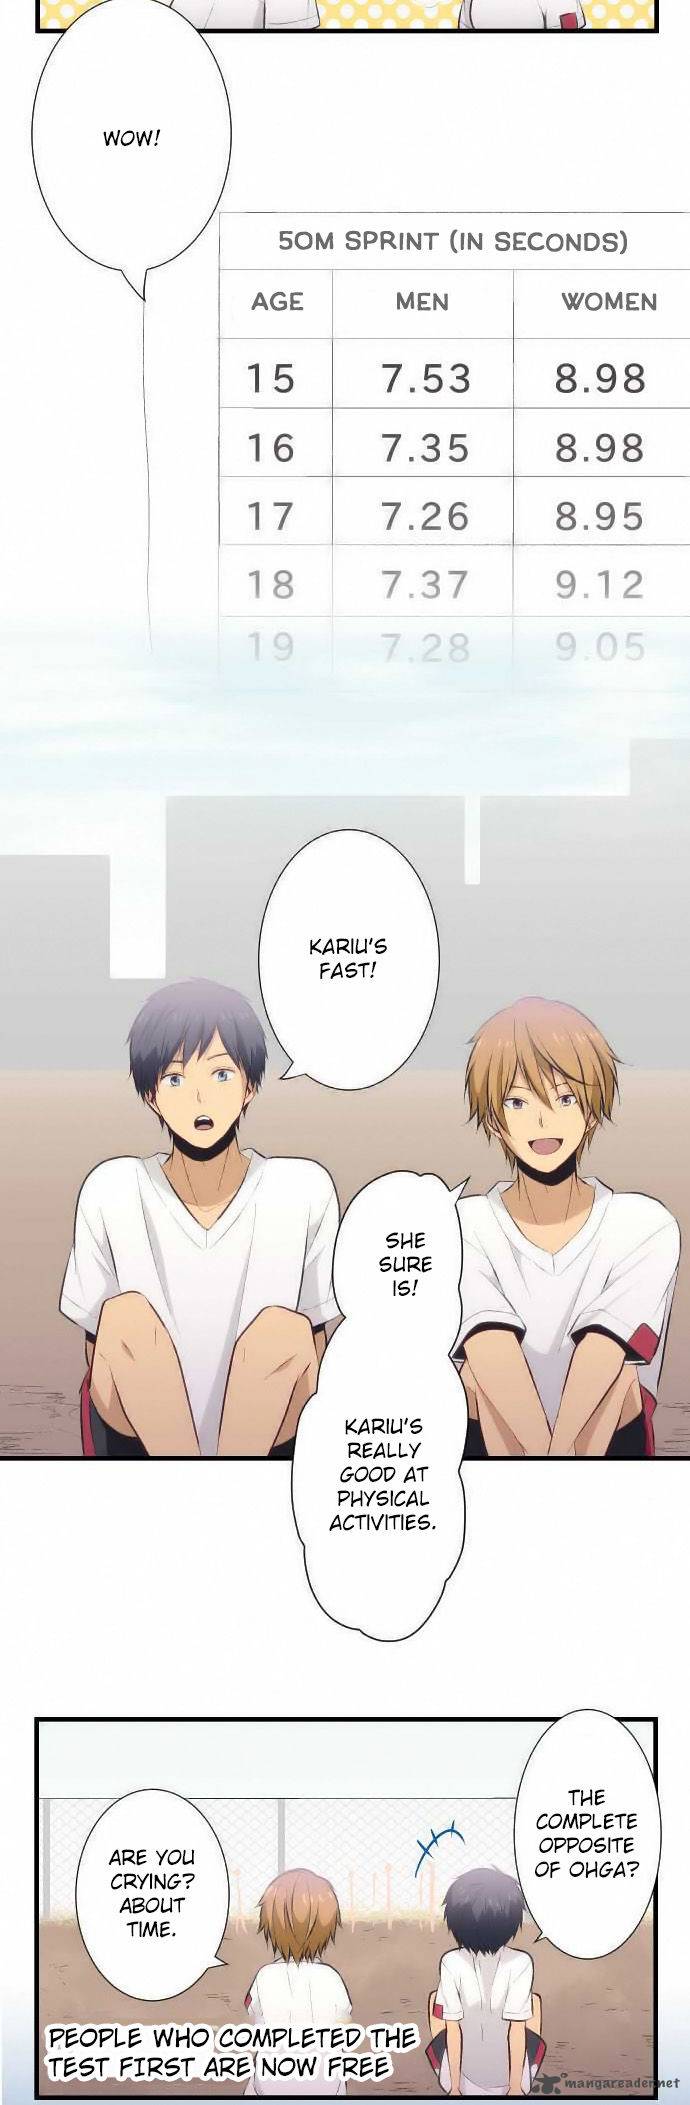 Relife 28 14